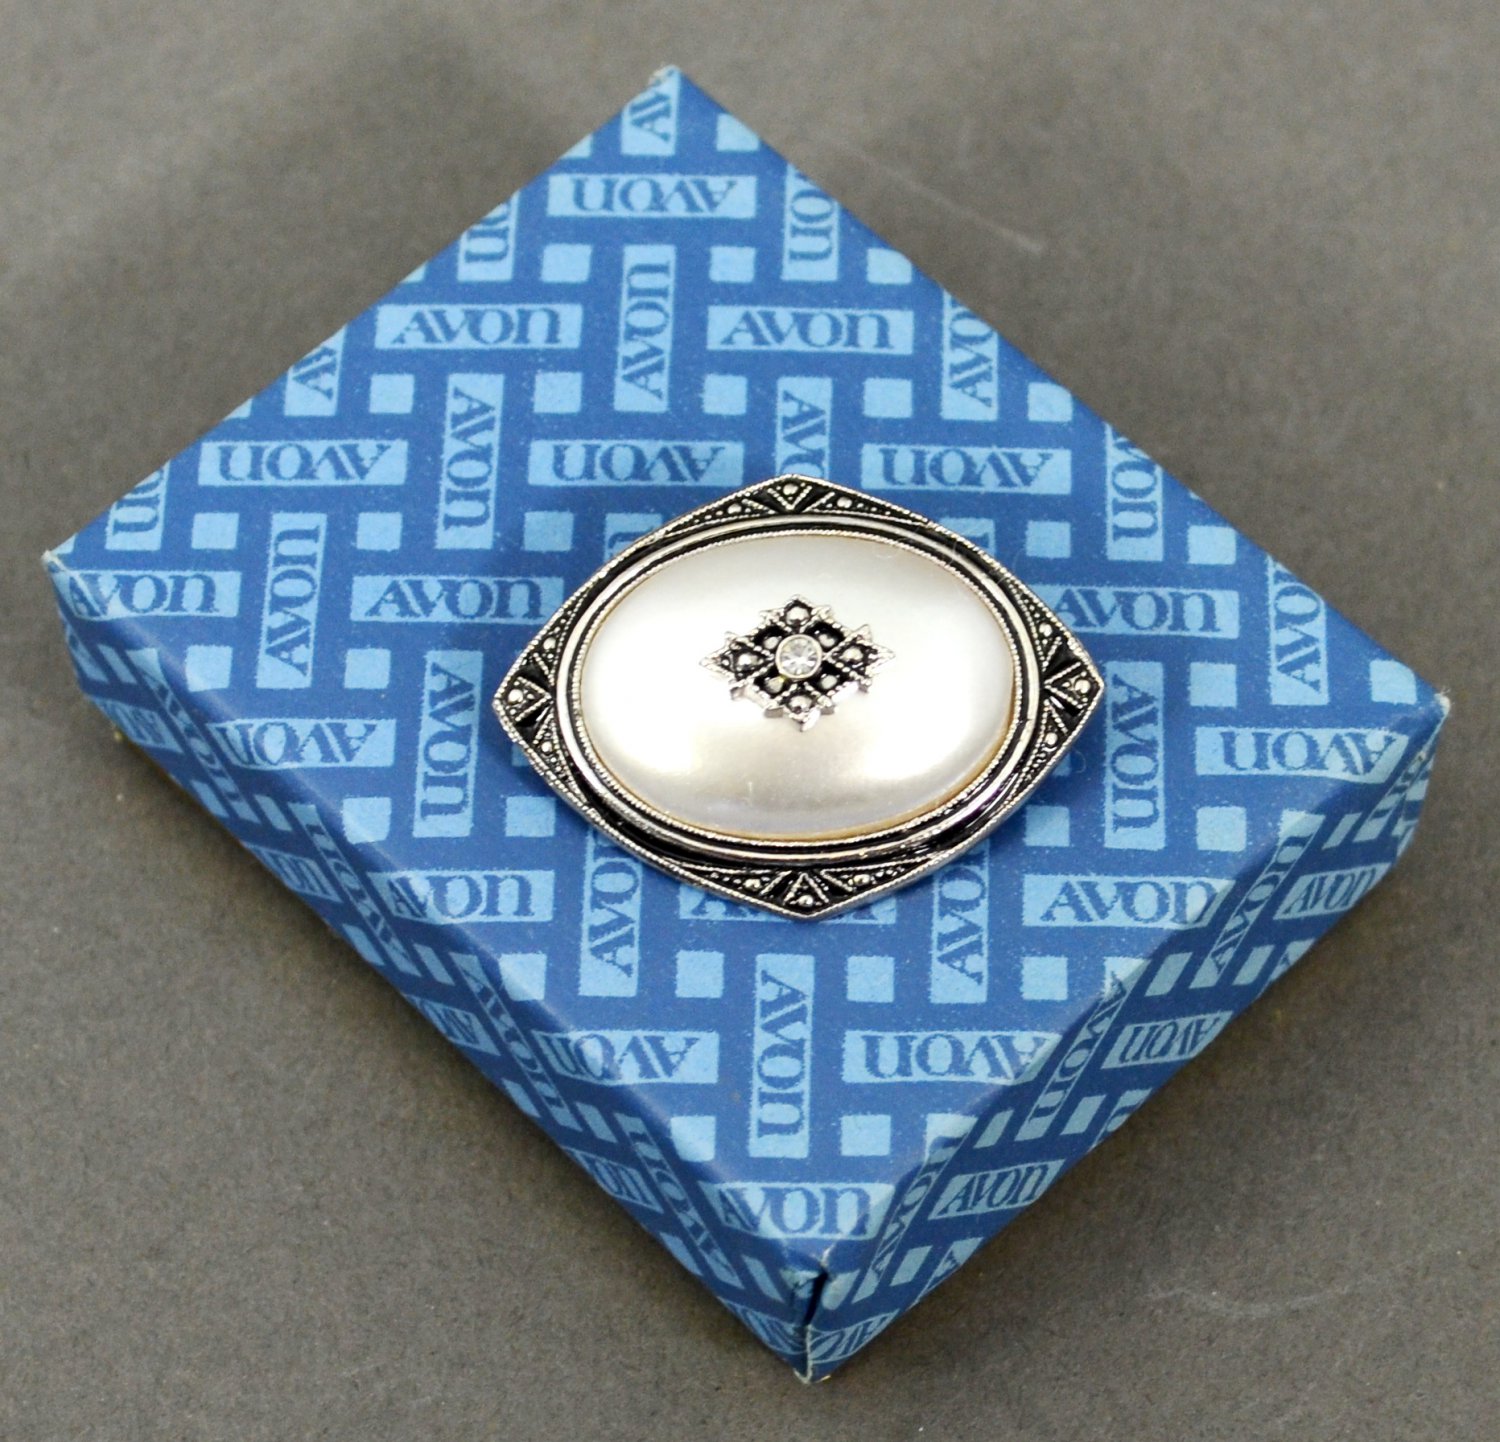 1980 Avon Chesterfield Collection Pin Pendant